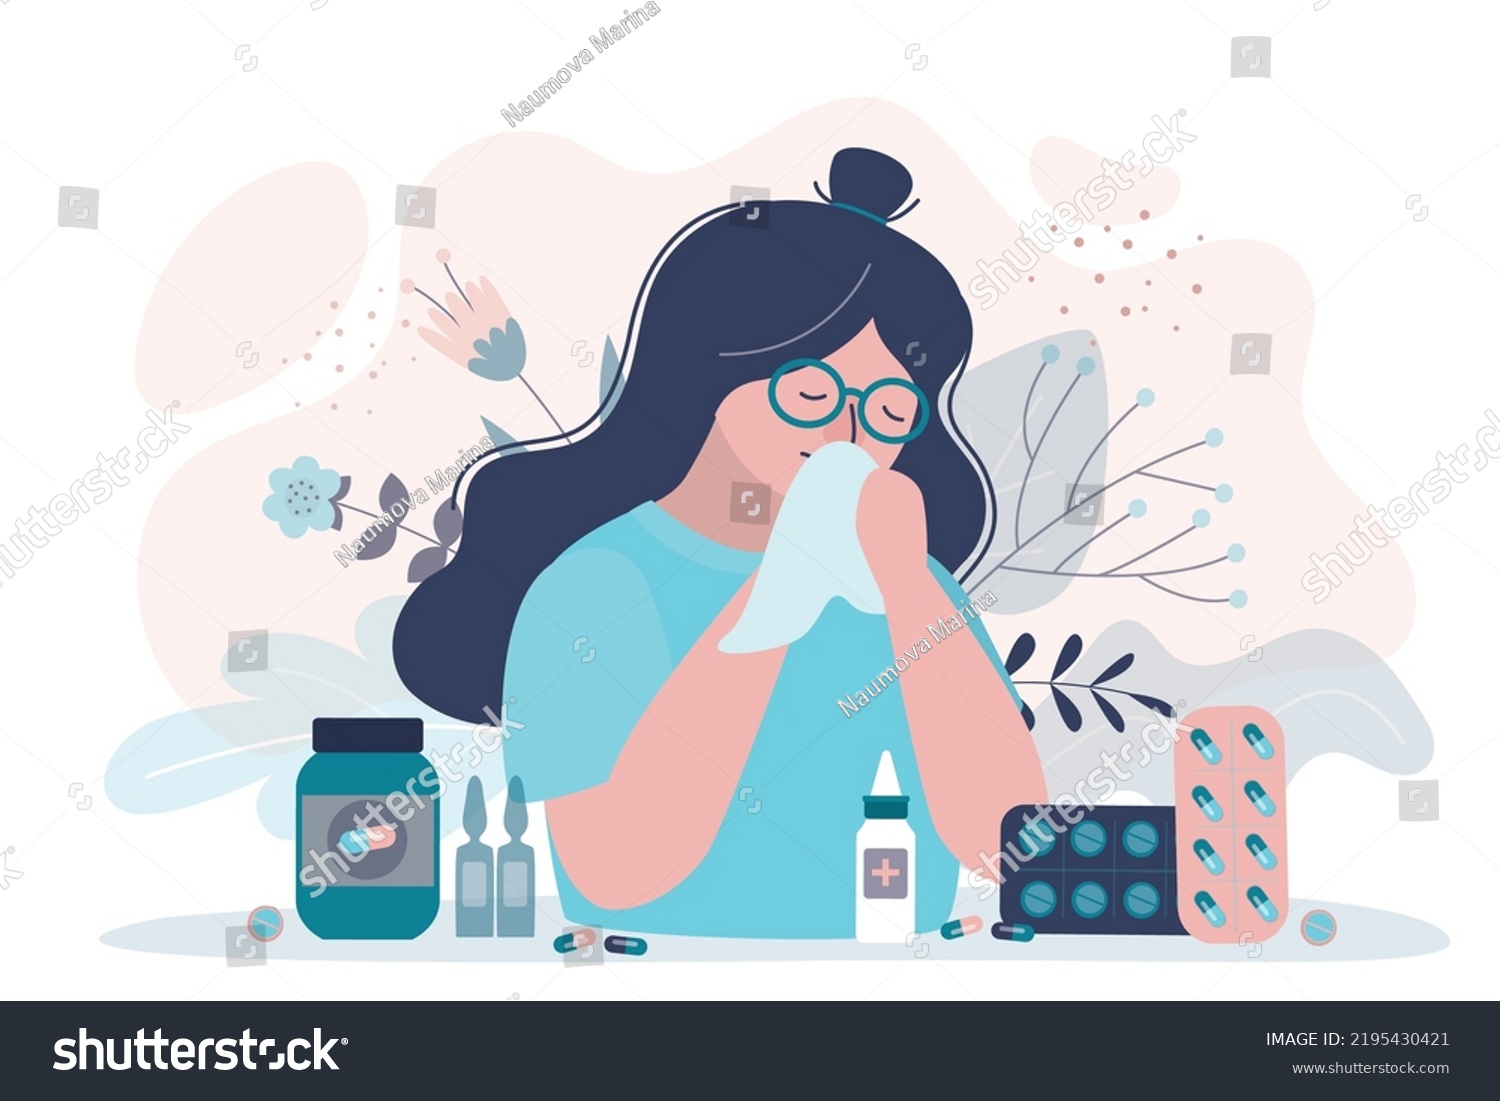 Female character experiencing severe allergies during flower bloom. Girl uses medication to suppress allergies. Woman with runny nose suffering from allergens. Seasonal allergy. Vector illustration #2195430421